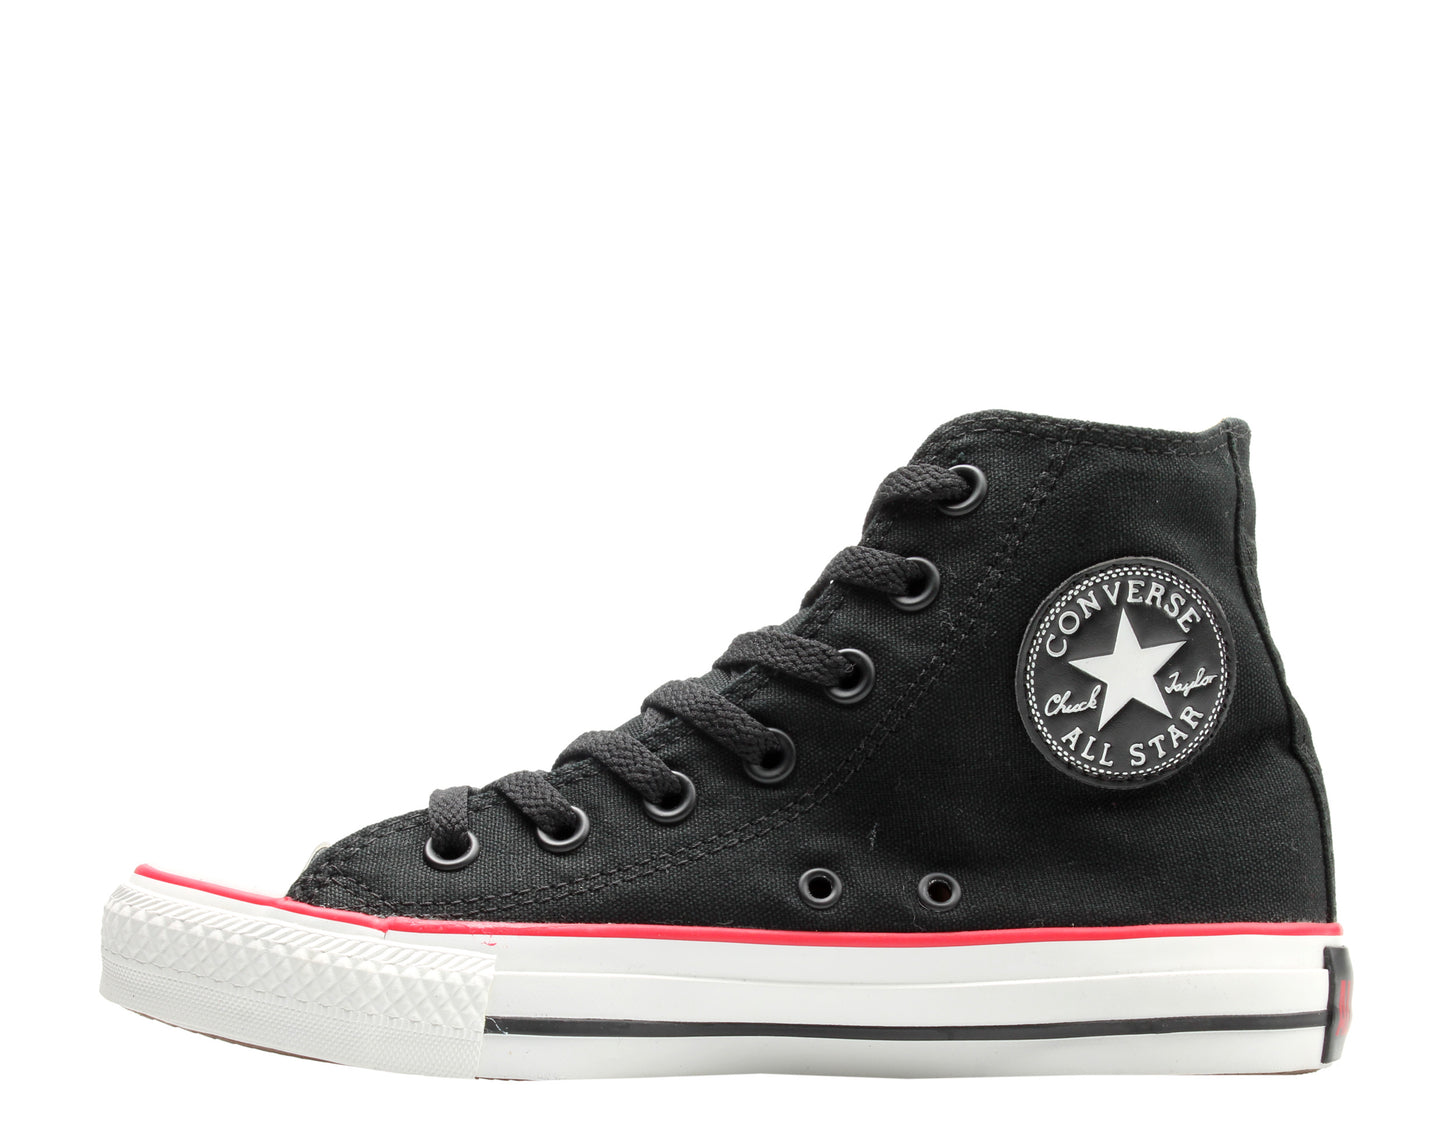 Converse Chuck Taylor All Star The Clash 2 Black/Red High Top Sneakers 114001